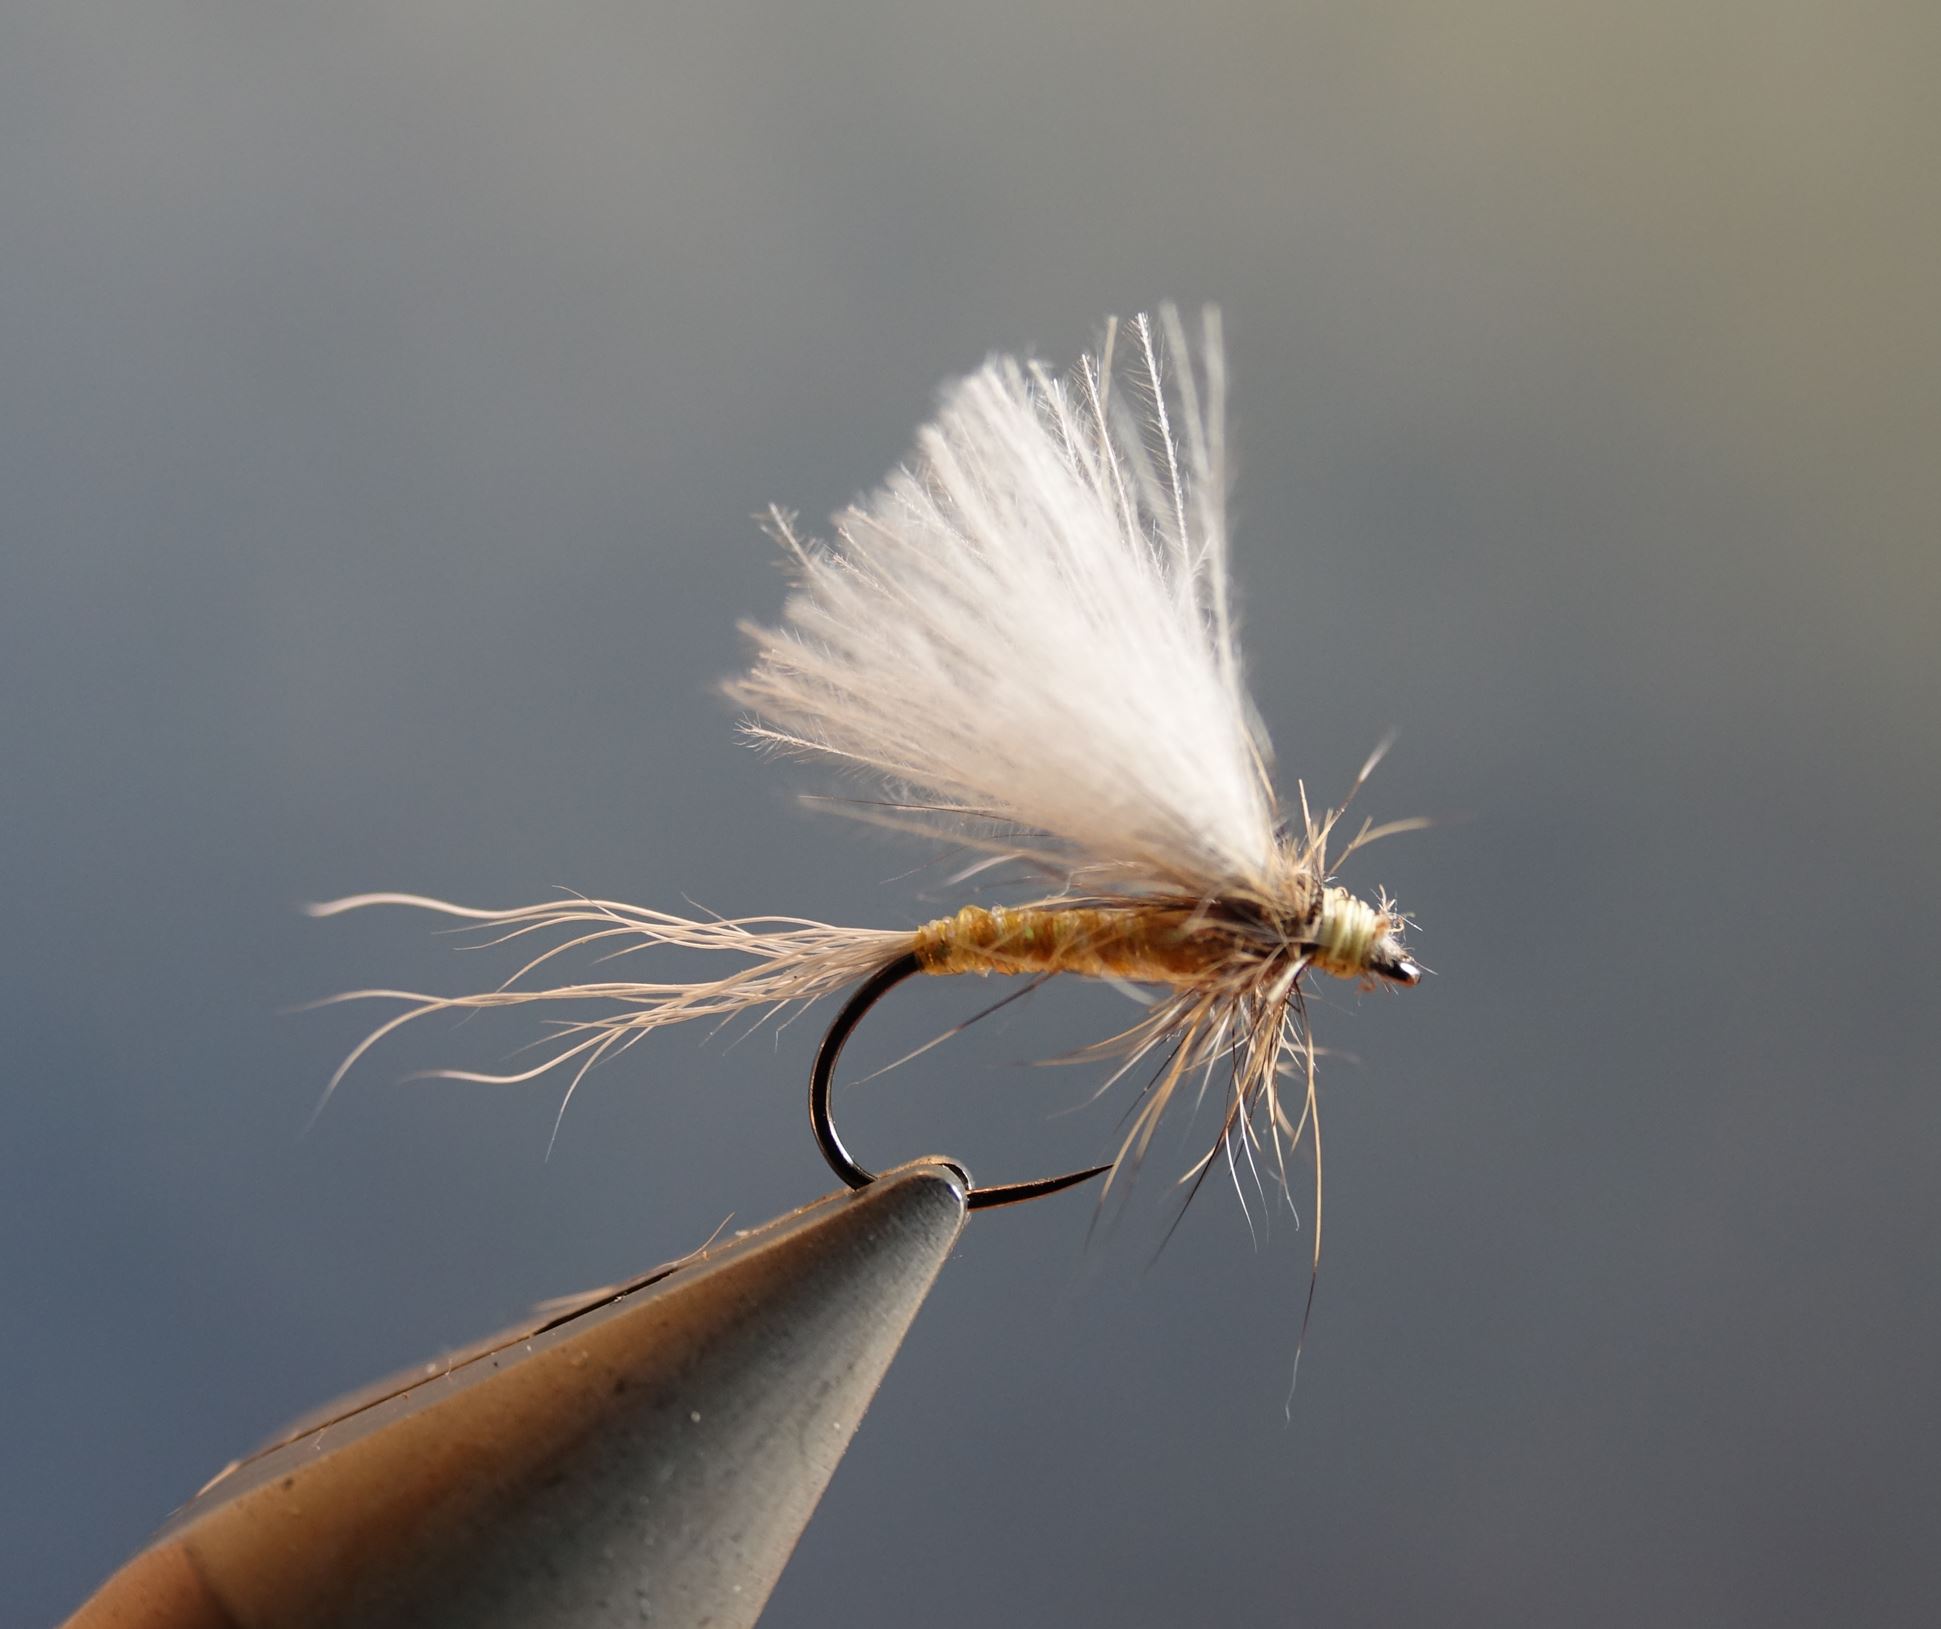 Mane blanche veau veal cerque tail fur fly mche flytying eclosion